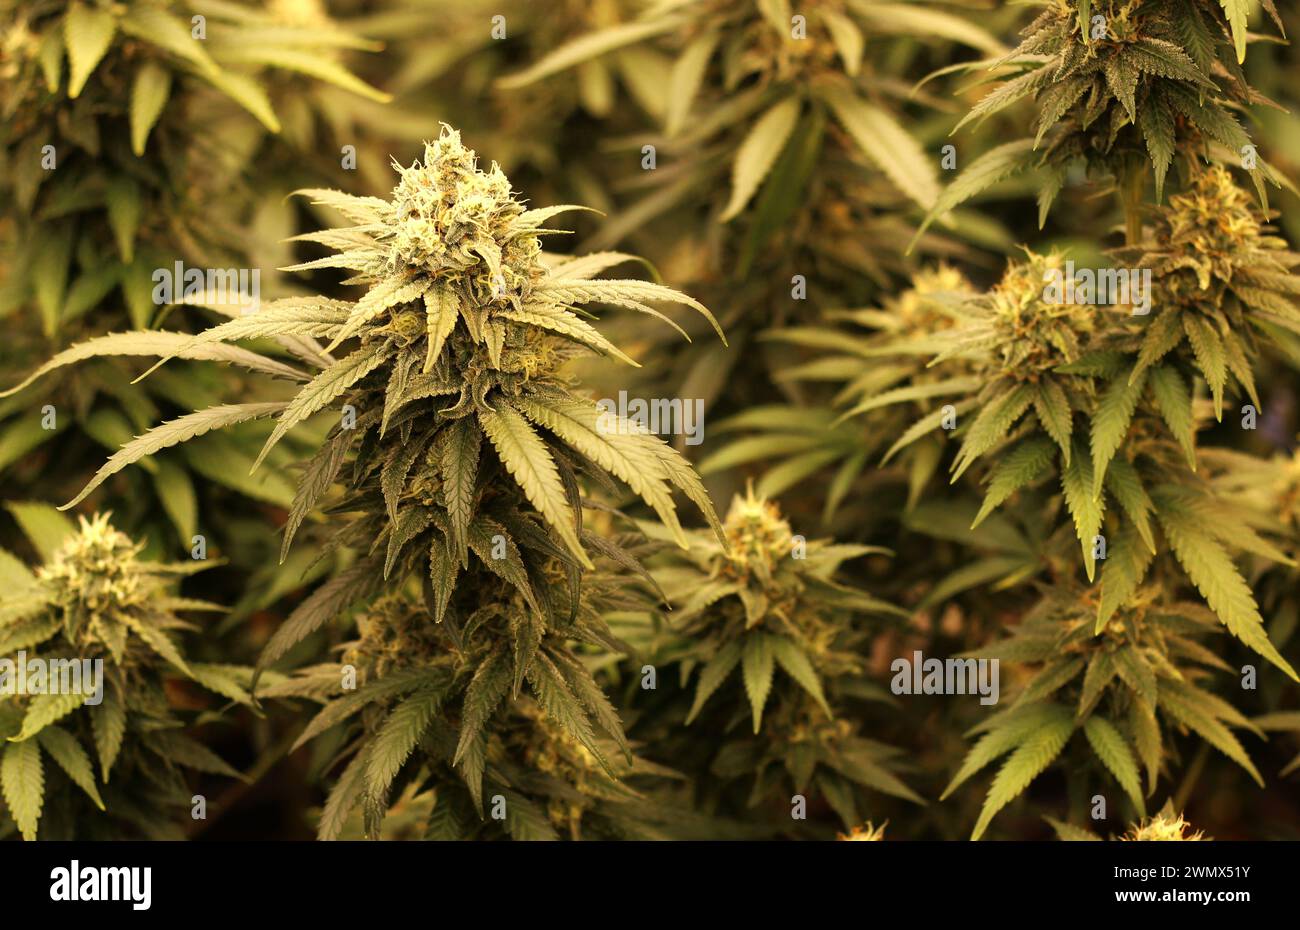 Vivid cannabis plant featuring lush foliage and flowering buds, a testament to its natural beauty and potential Stock Photo